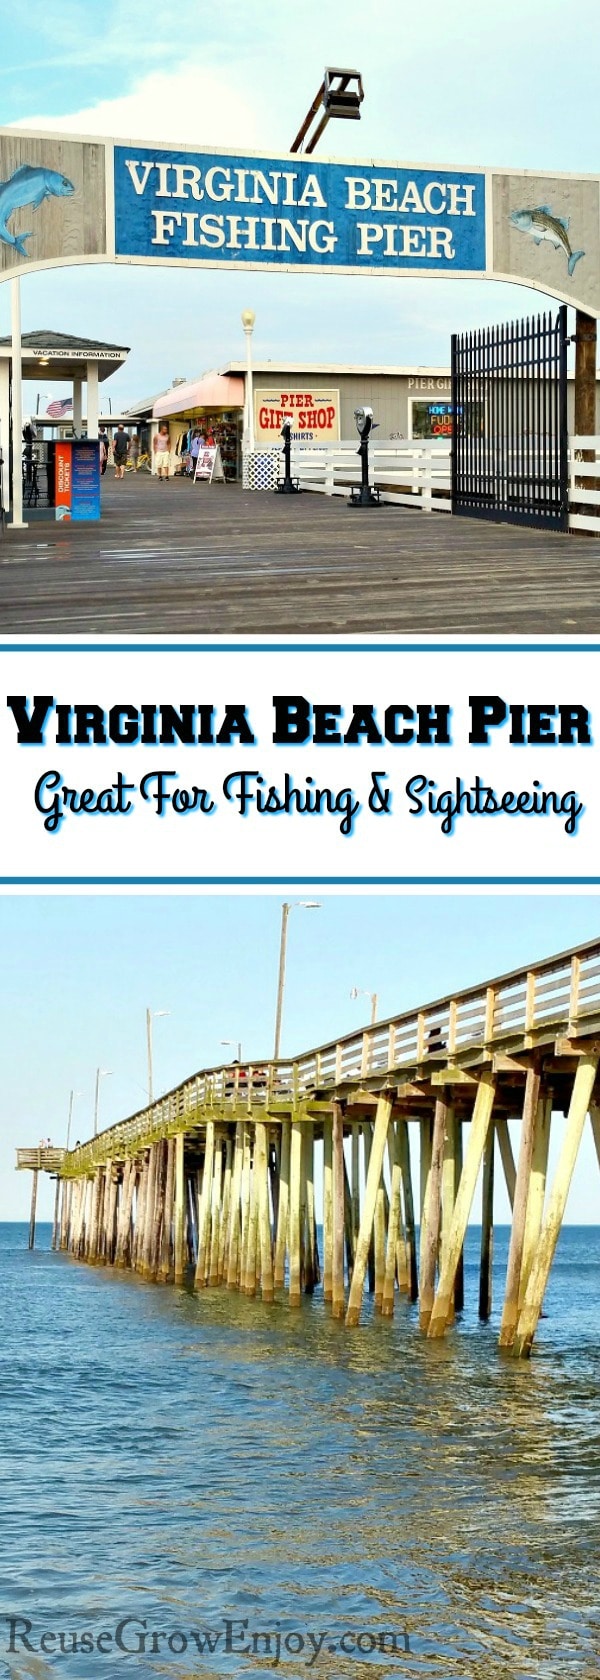 If you are thinking about making a trip to Virginia Beach, you really should add Virginia Beach pier to your visit list. It has a lot to offer and it is not all just fishing either.